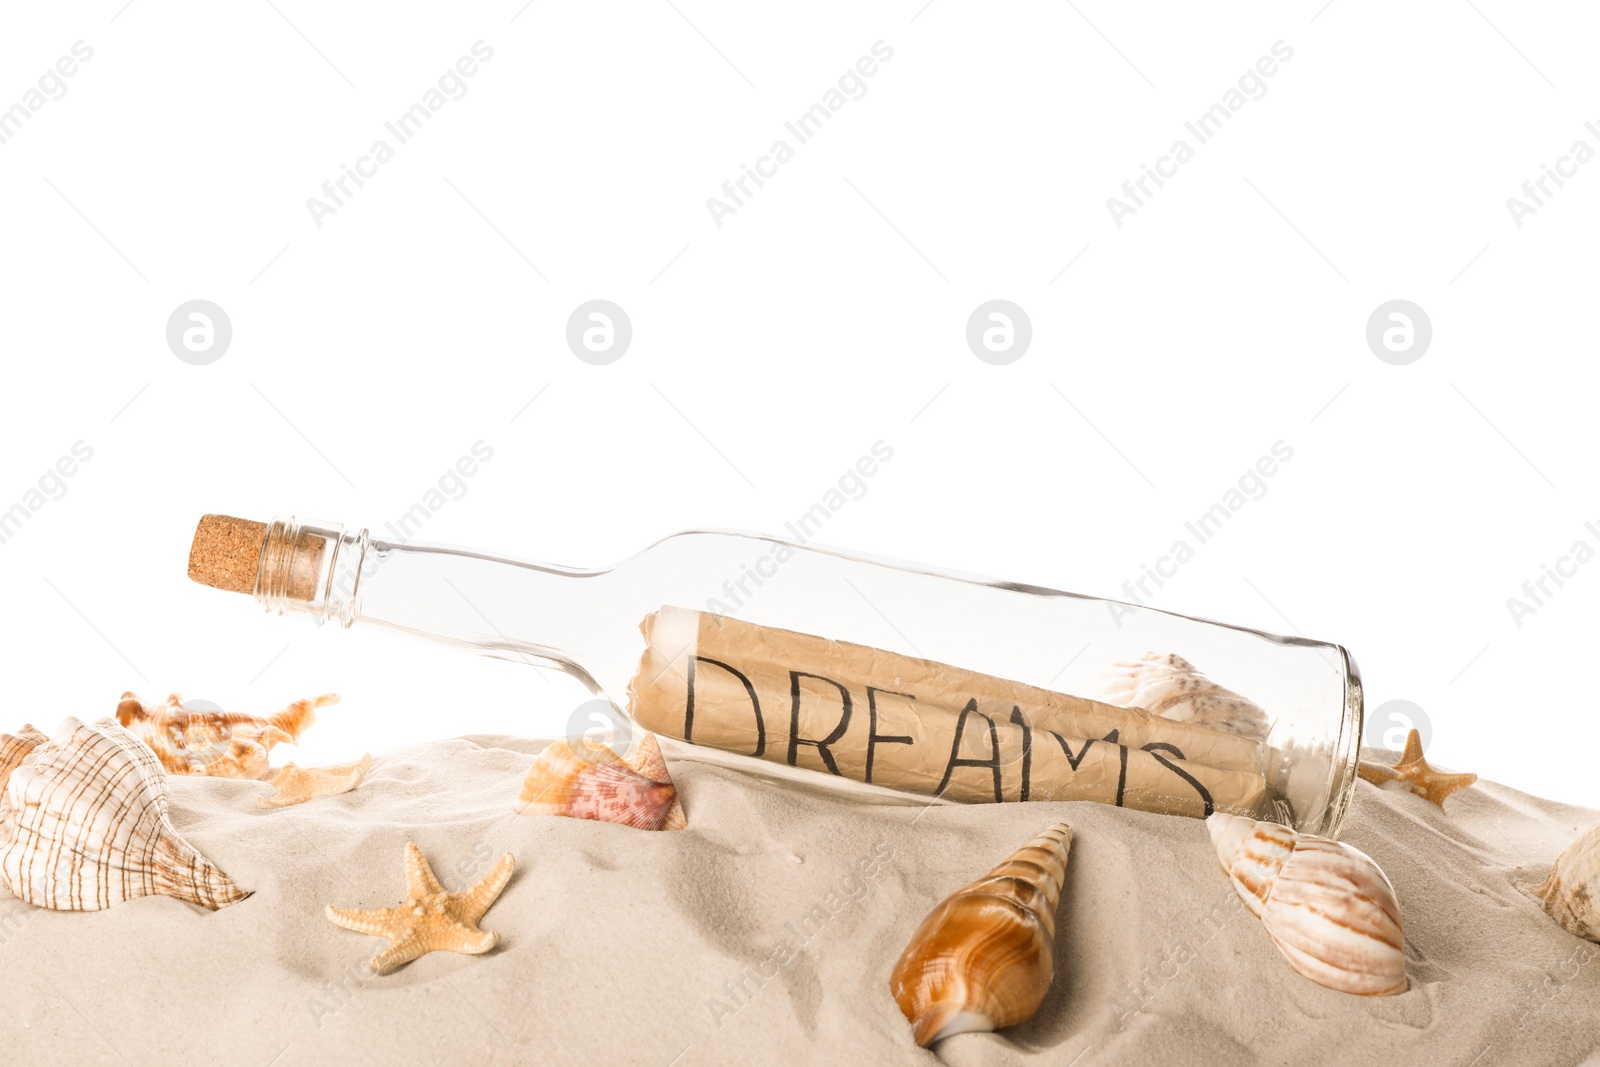 Photo of Corked glass bottle with Dreams note and seashells on sand against white background